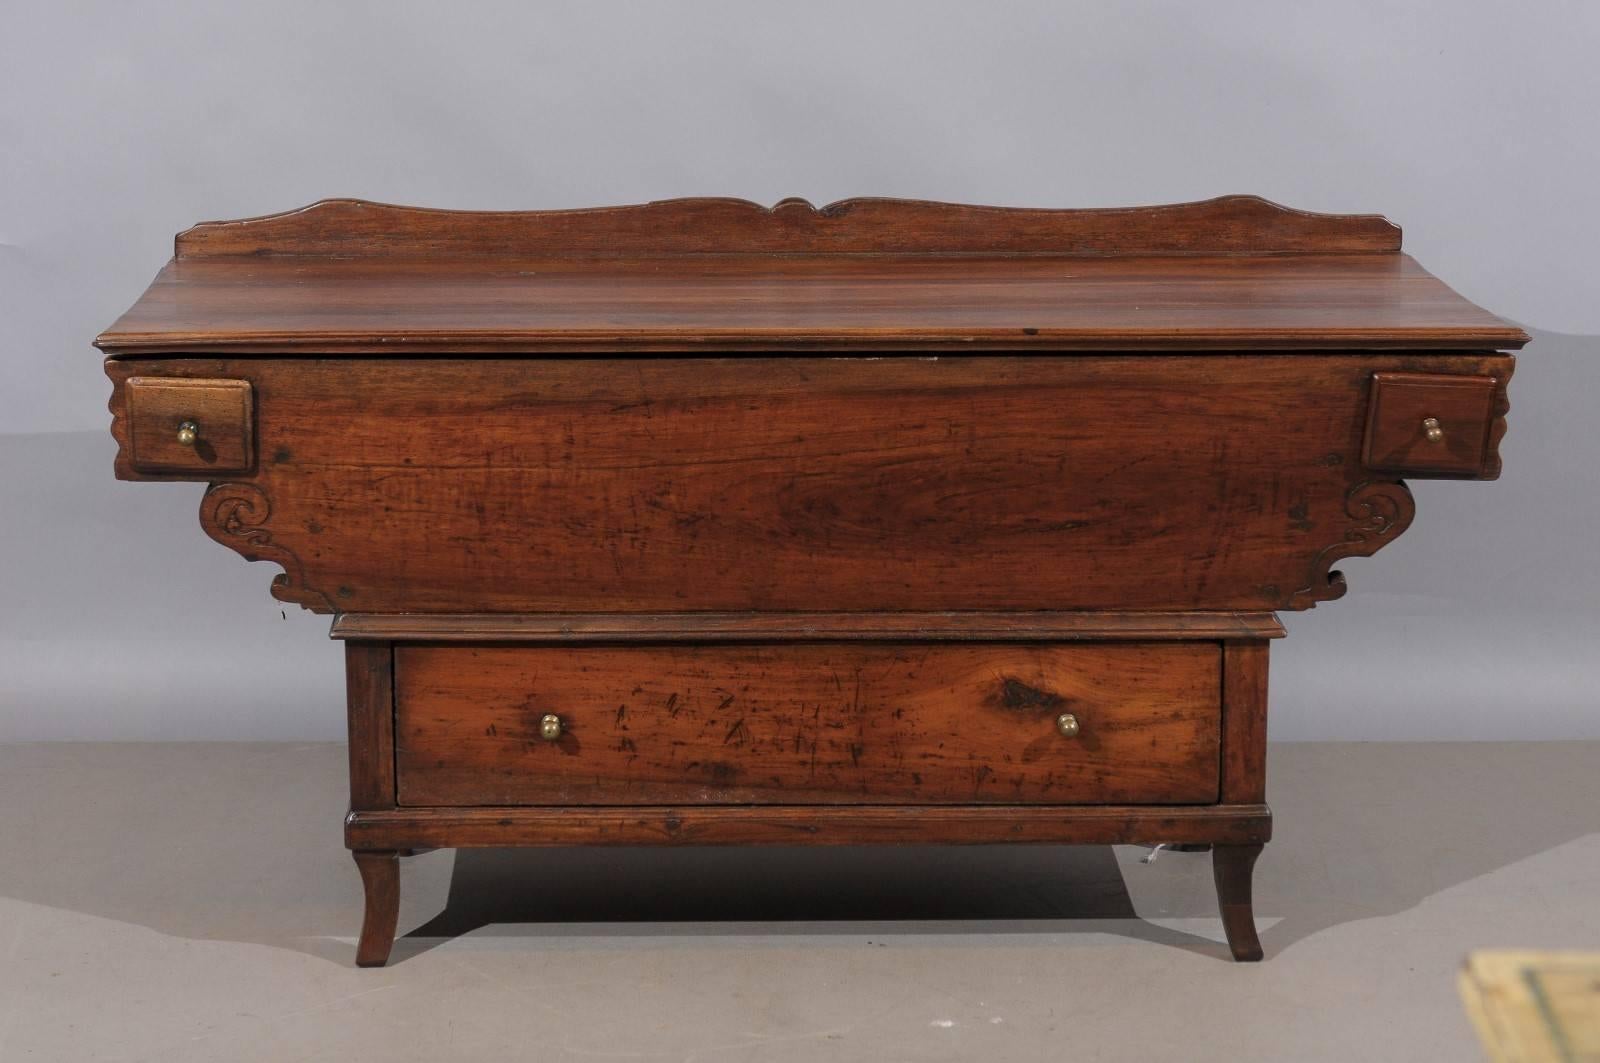 Long rustic walnut and elm dough bin, Switzerland 18th century. It has a lift top, two (2) small side drawers and one (1) large lower drawer.